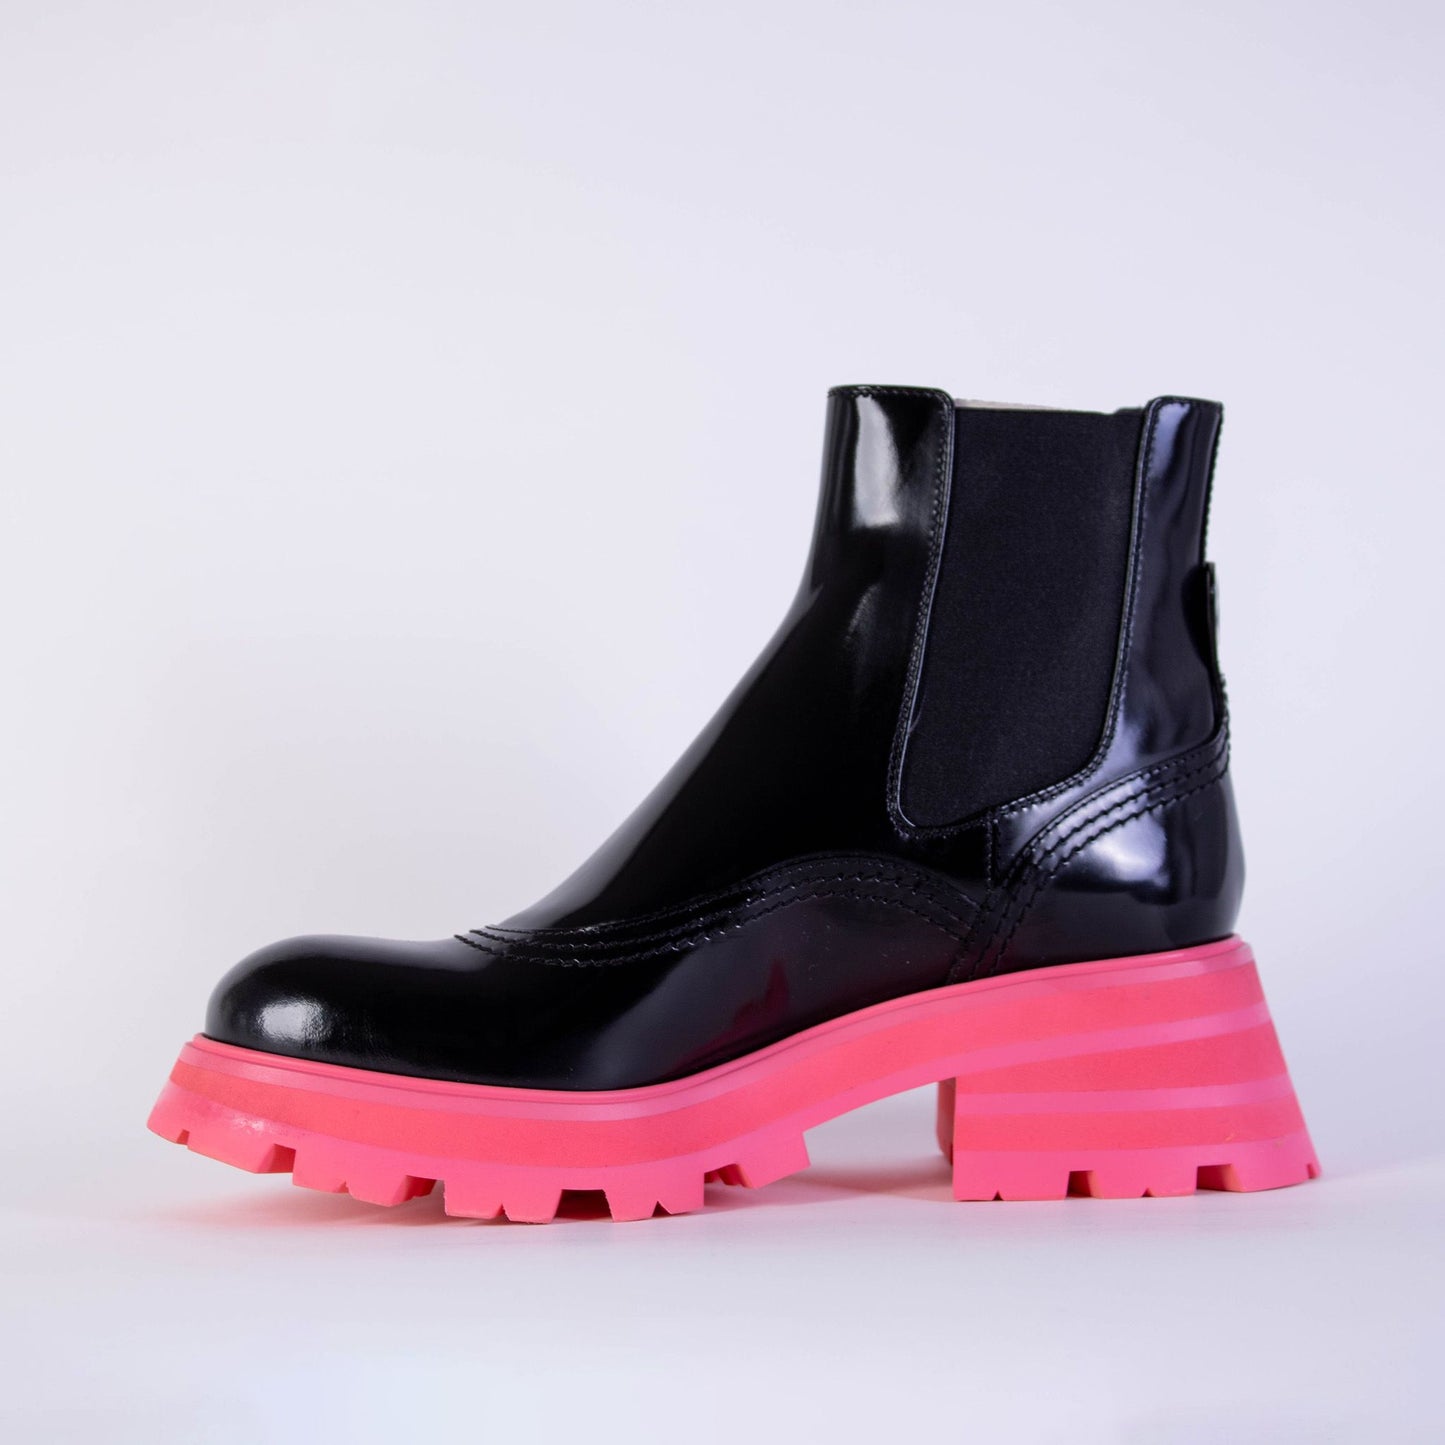 Alexander McQueen Elegant Leather Chelsea Boots with Unique Flared Sole